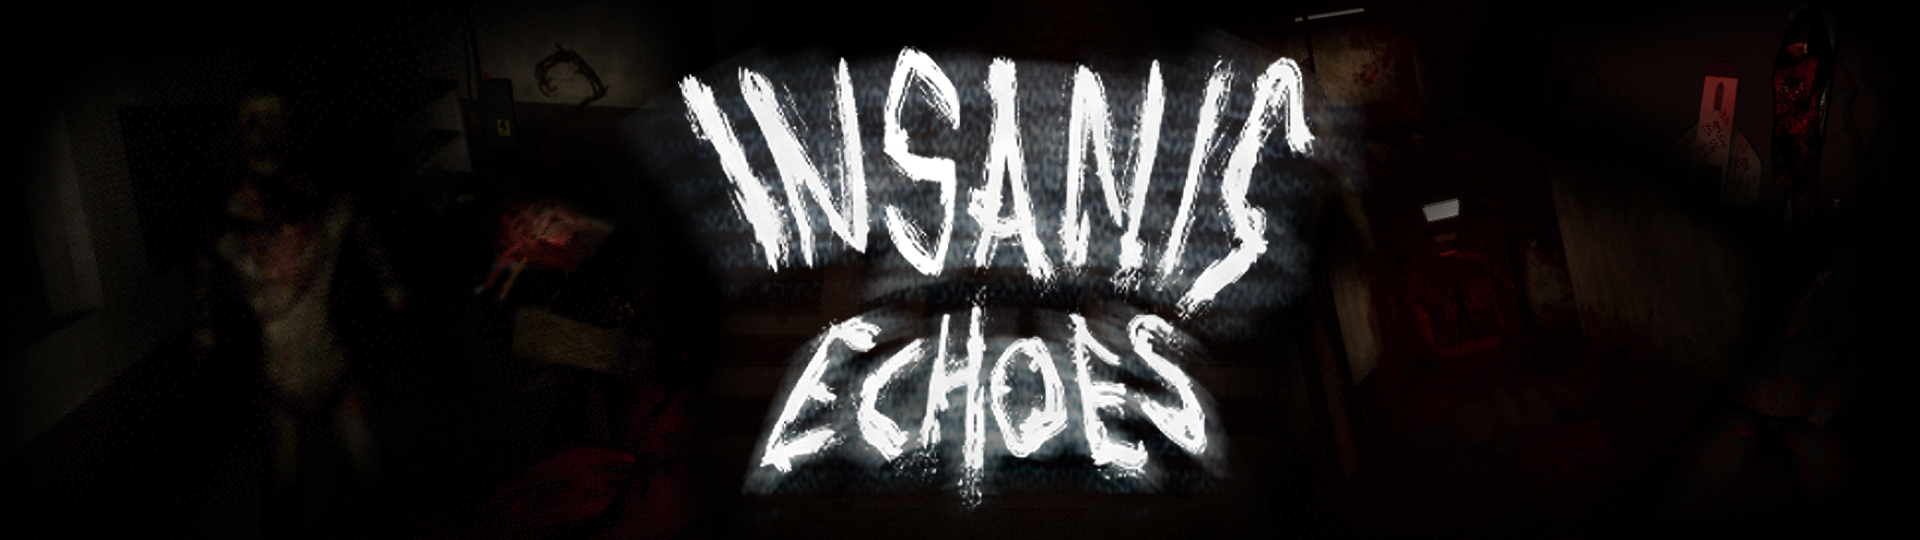 Insanis Echoes